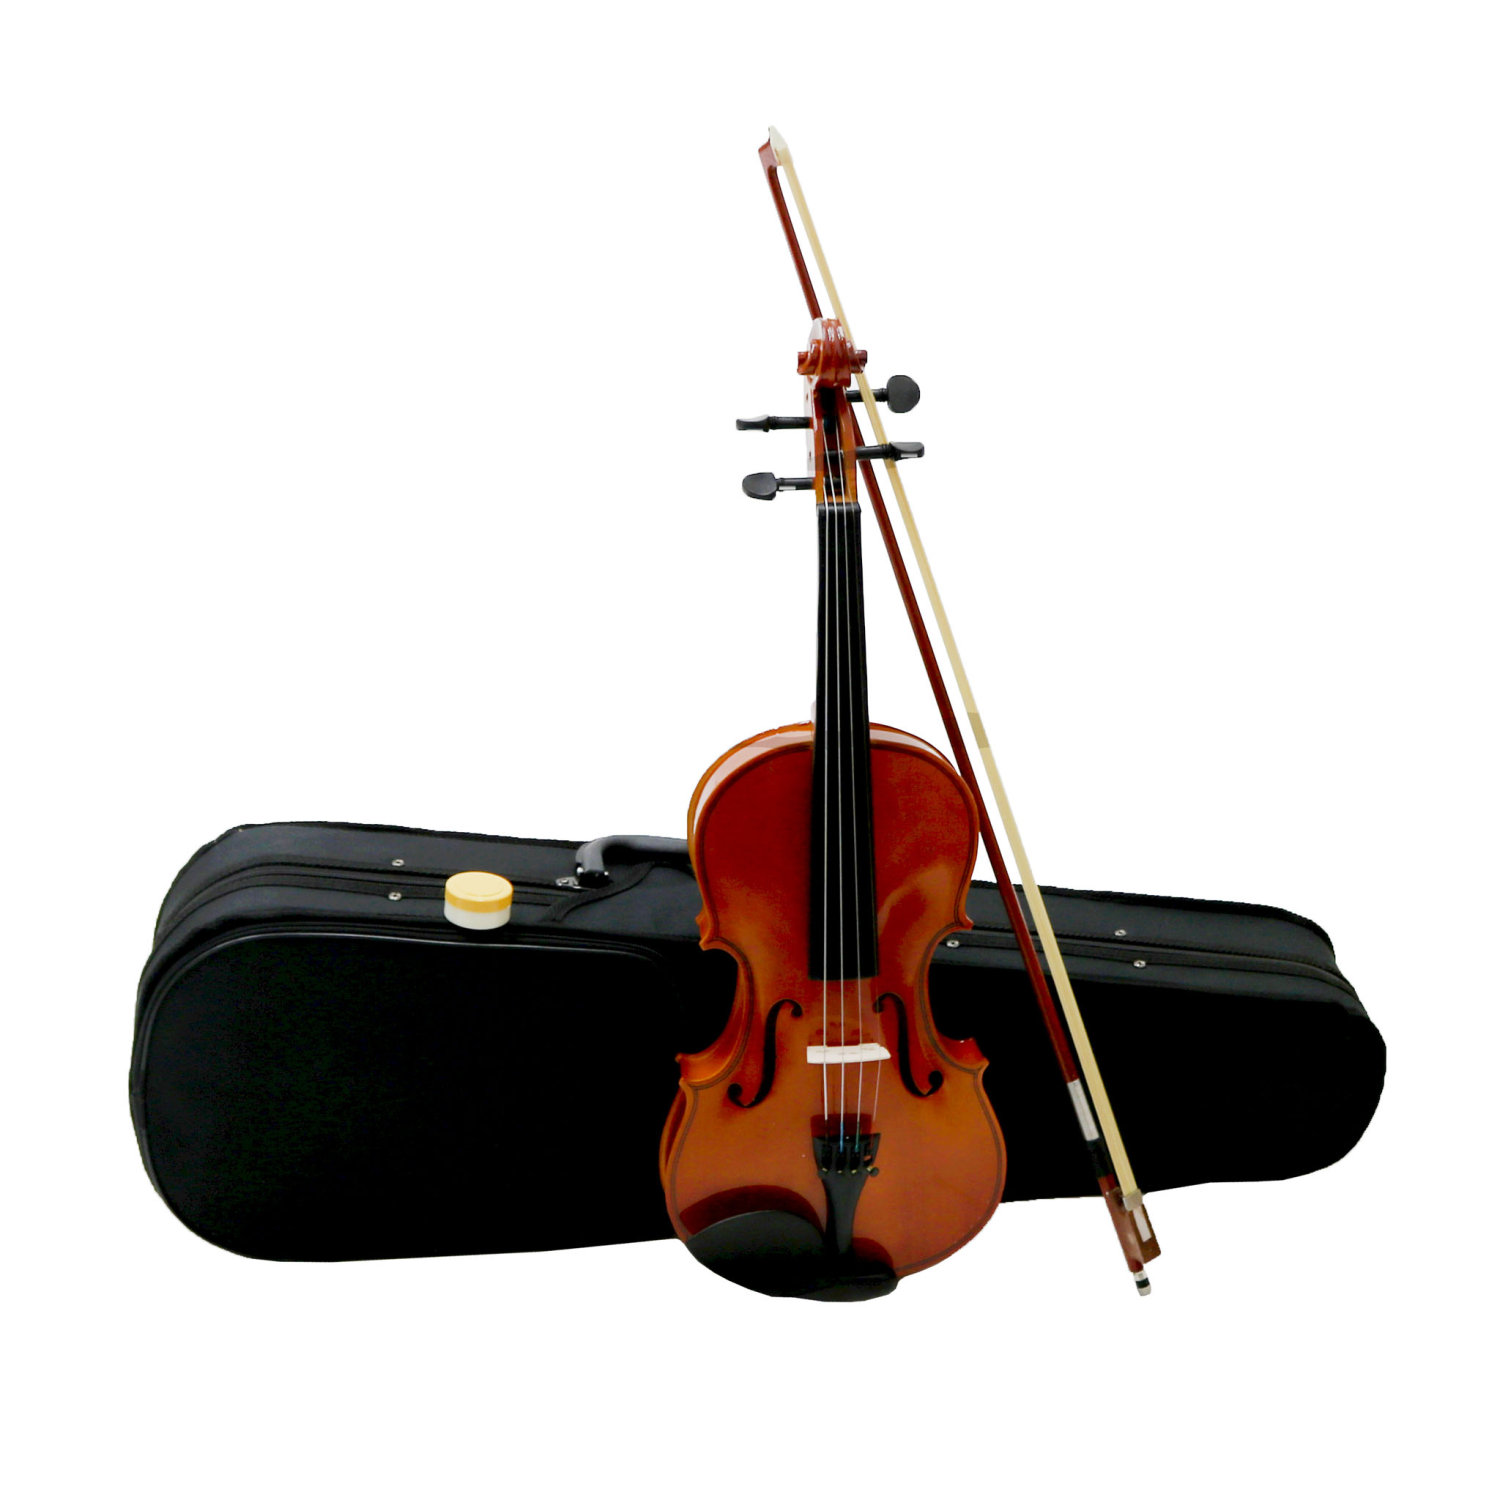 Violin Set Affordable Musical Instrument for Kids Beginners Students Adults Case Bow Rosin 4/4 High-grade 8 Pattern Electroacoustic Violin Kit Black 